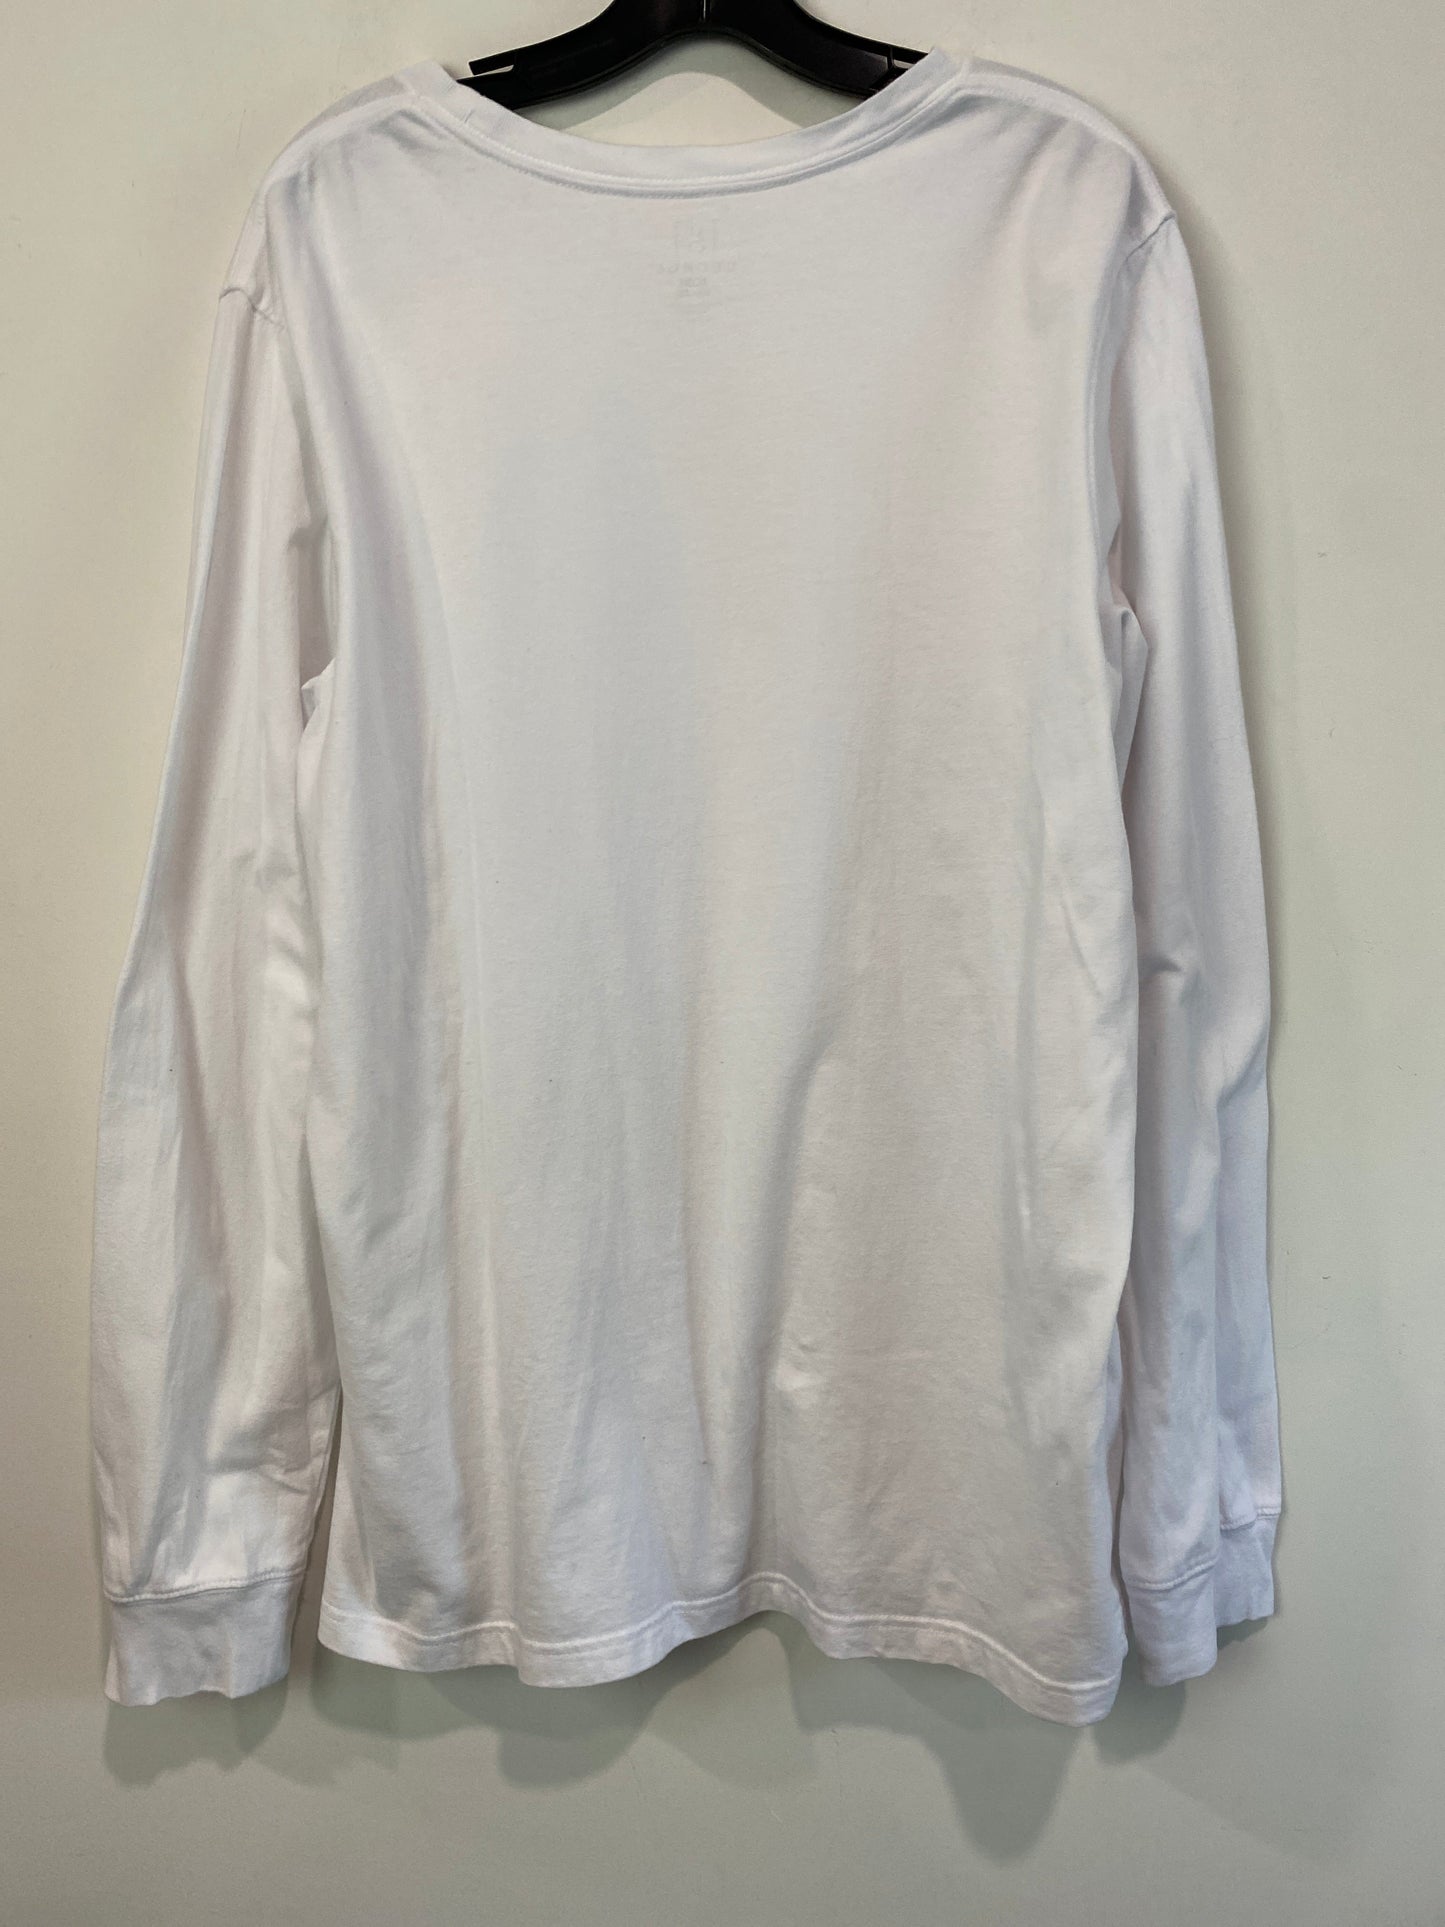 White Top Long Sleeve George, Size Xl